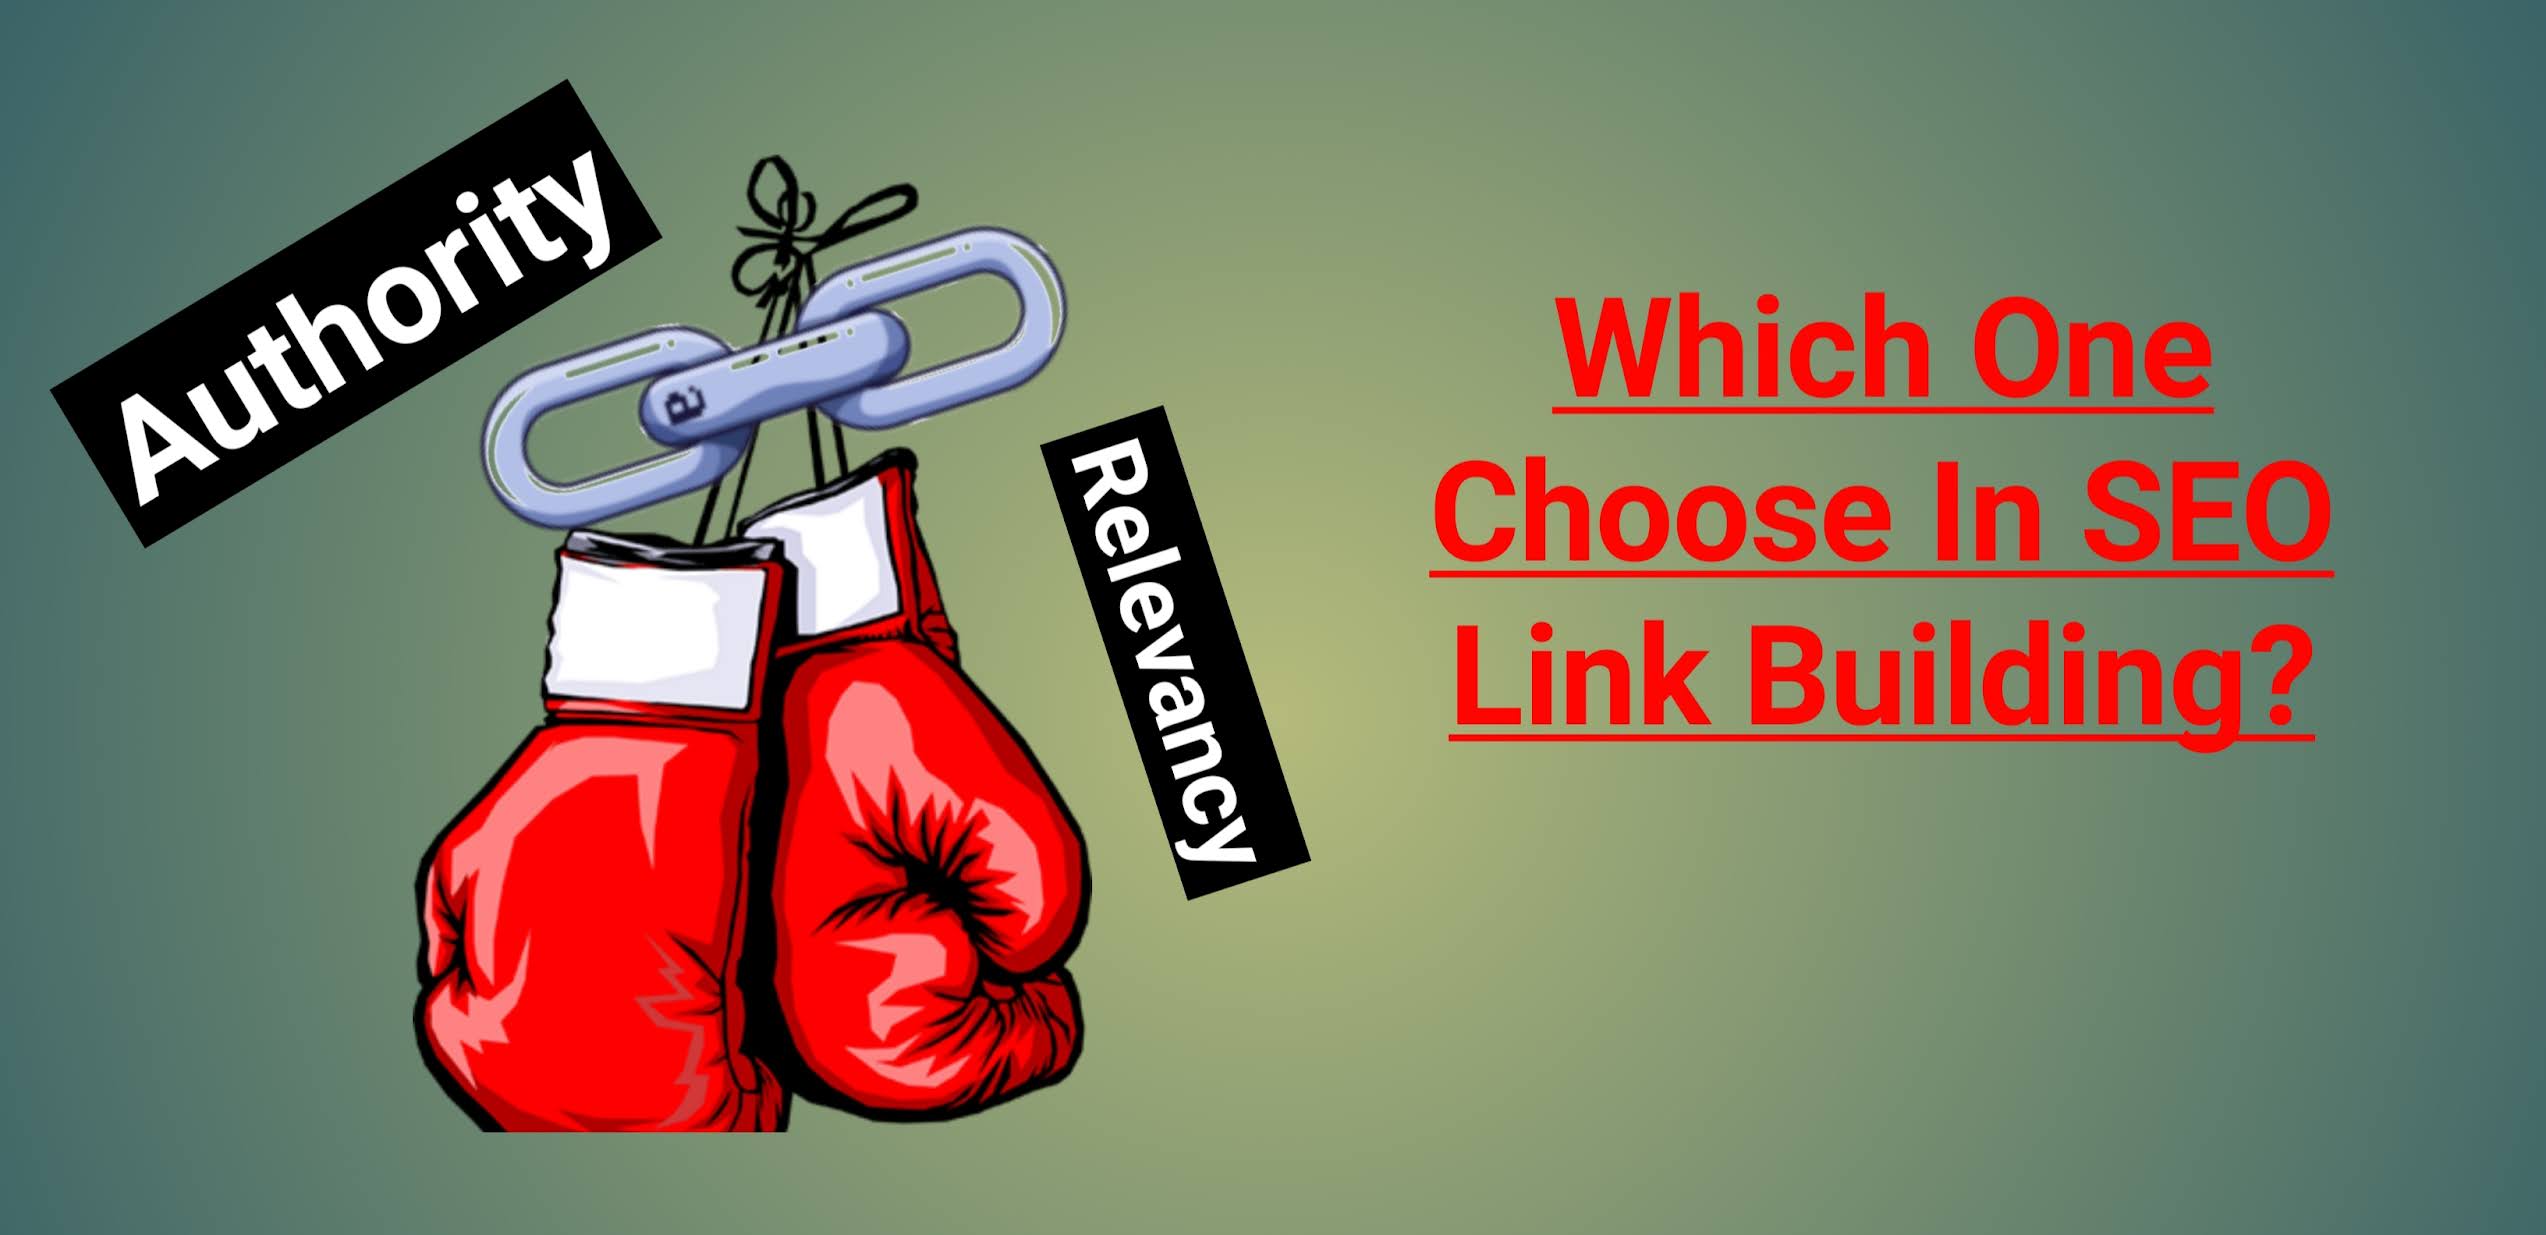 Authority Vs Relevancy - Which One Choose In SEO Link Building?